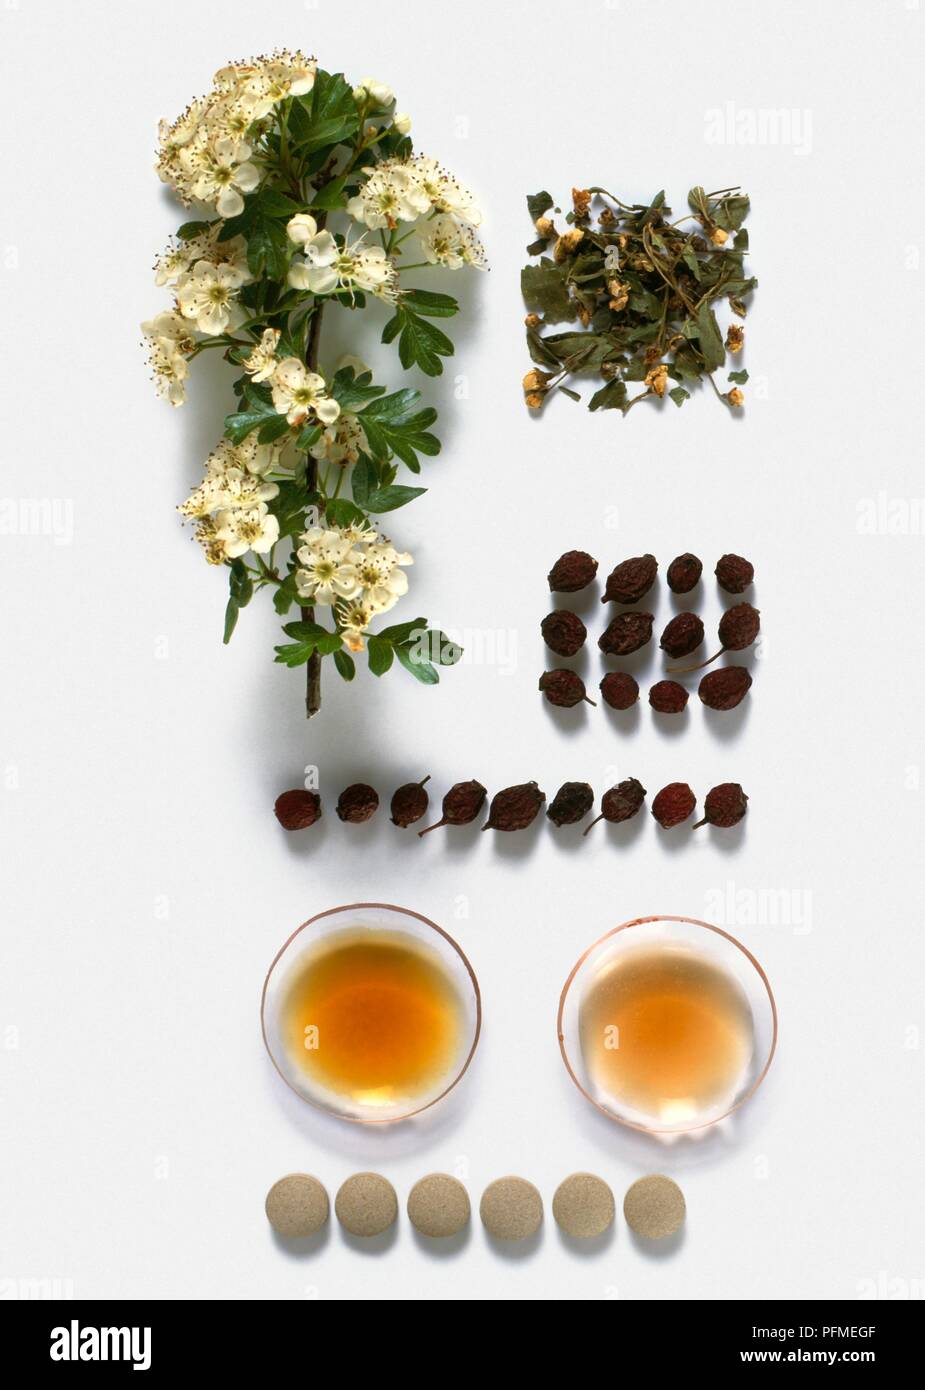 Crataegus oxyacantha (Hawthorn), white flowers on stem, dried flowering tops,  dried berries, tincture of flowering tops or berries, decoction of  flowering tops, and tablets Stock Photo - Alamy